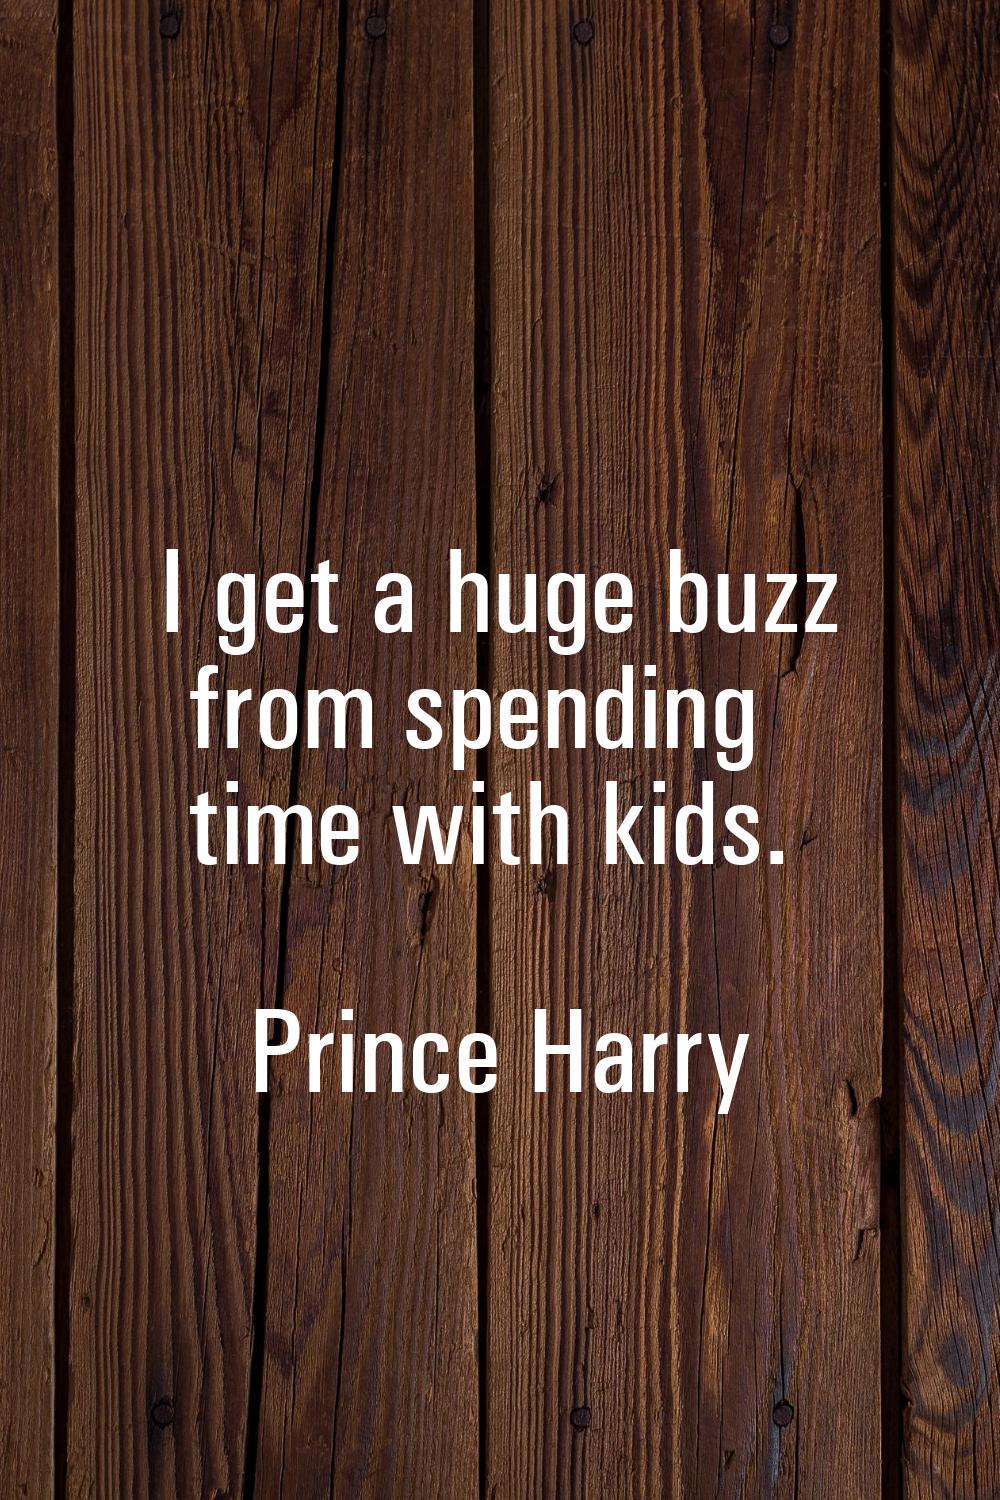 I get a huge buzz from spending time with kids.